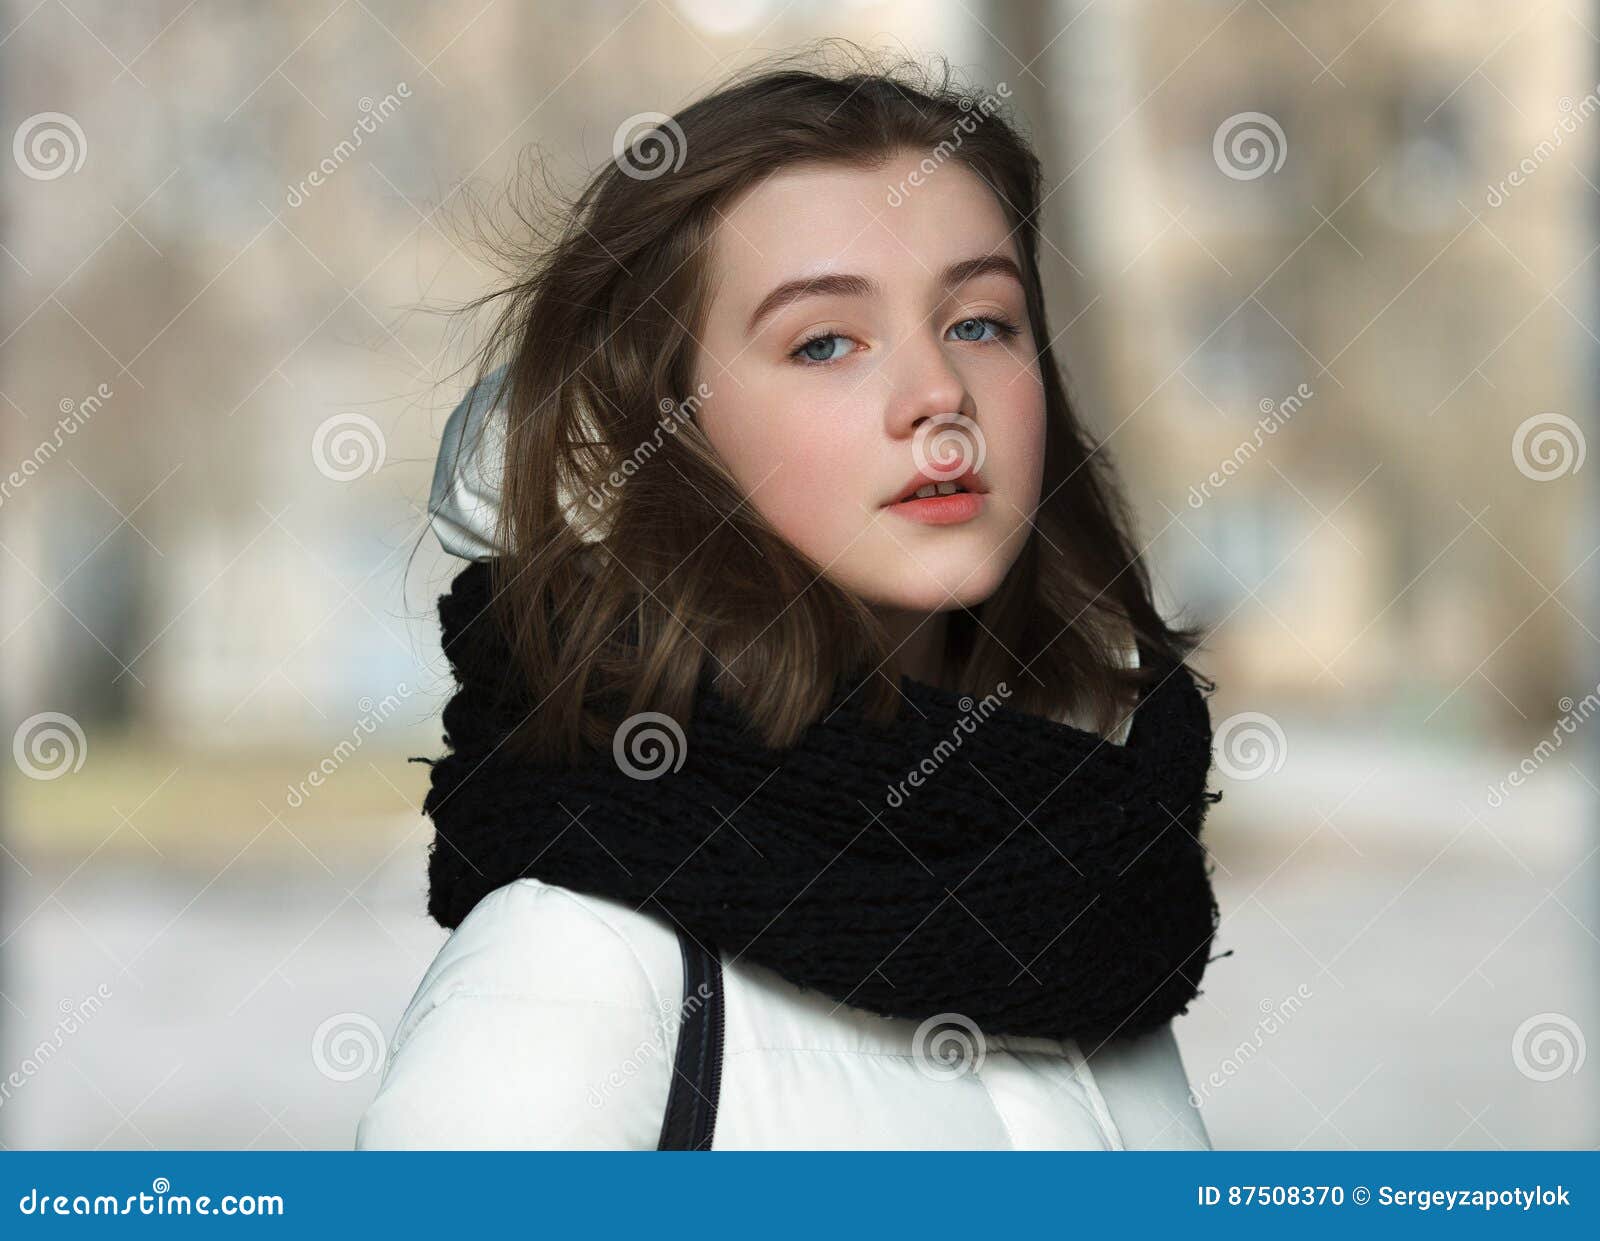 Cold Season Young Beautiful Woman Close Up Portrait Lifestyle Concept ...